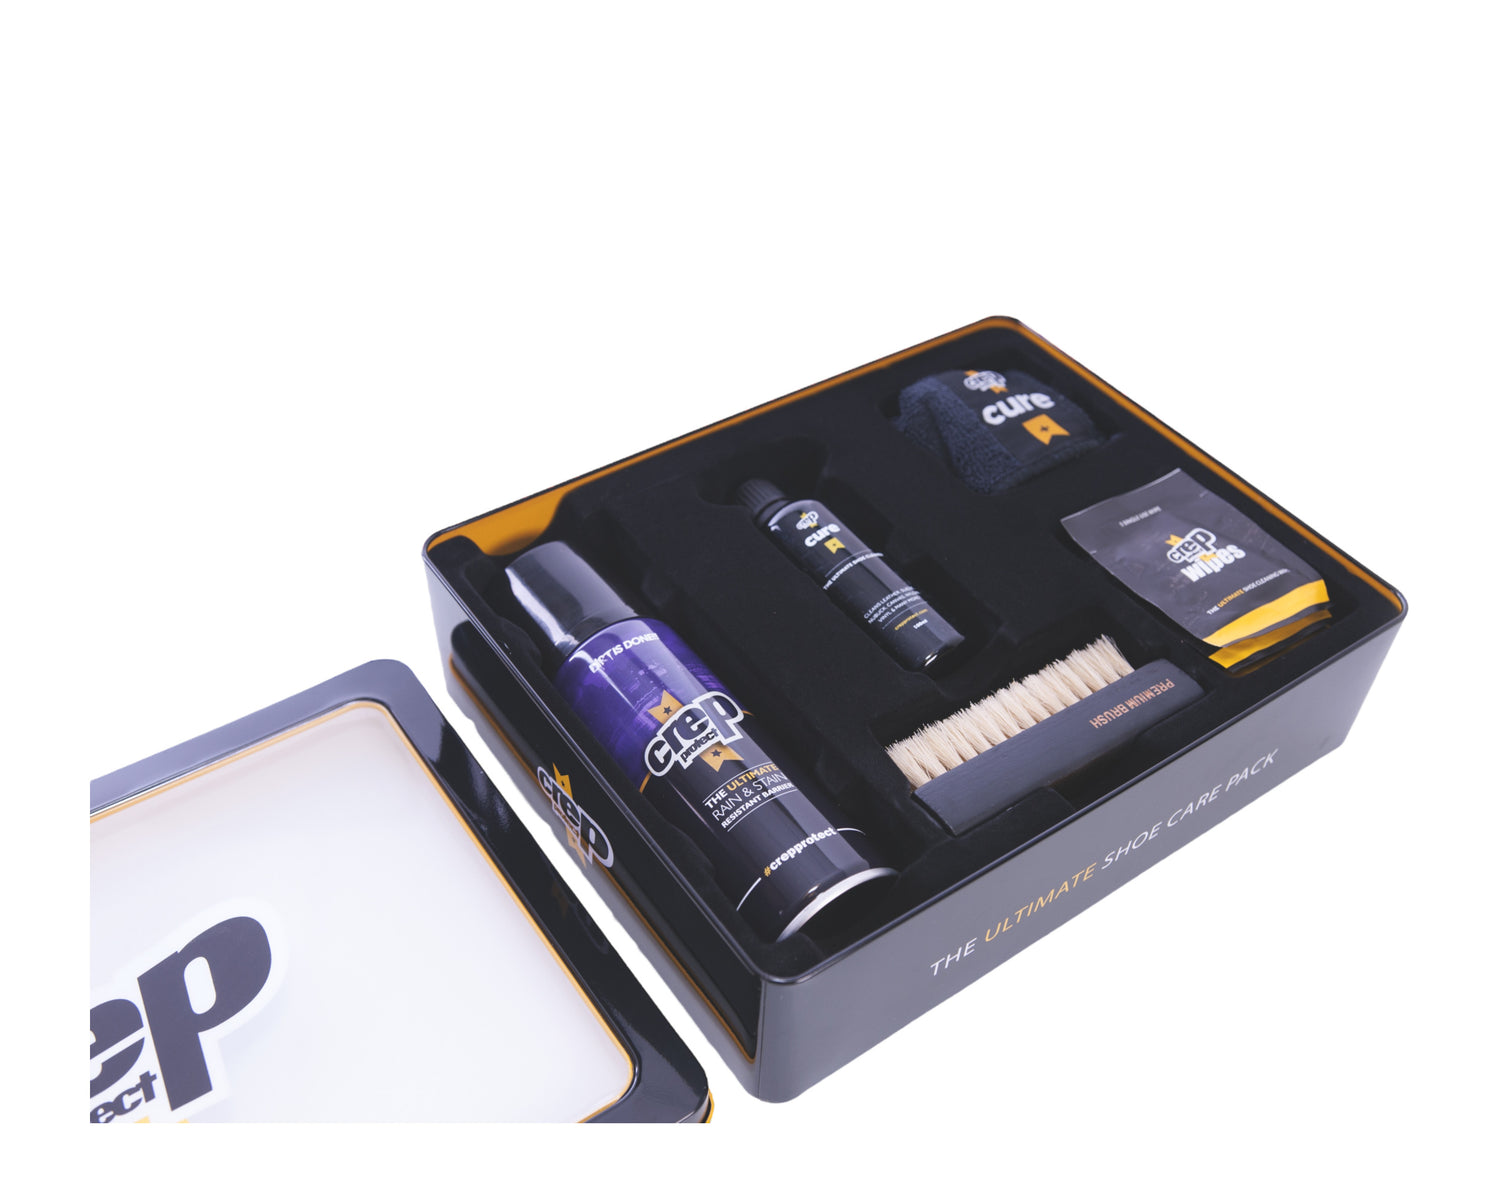 Crep Protect Gift Pack Tin